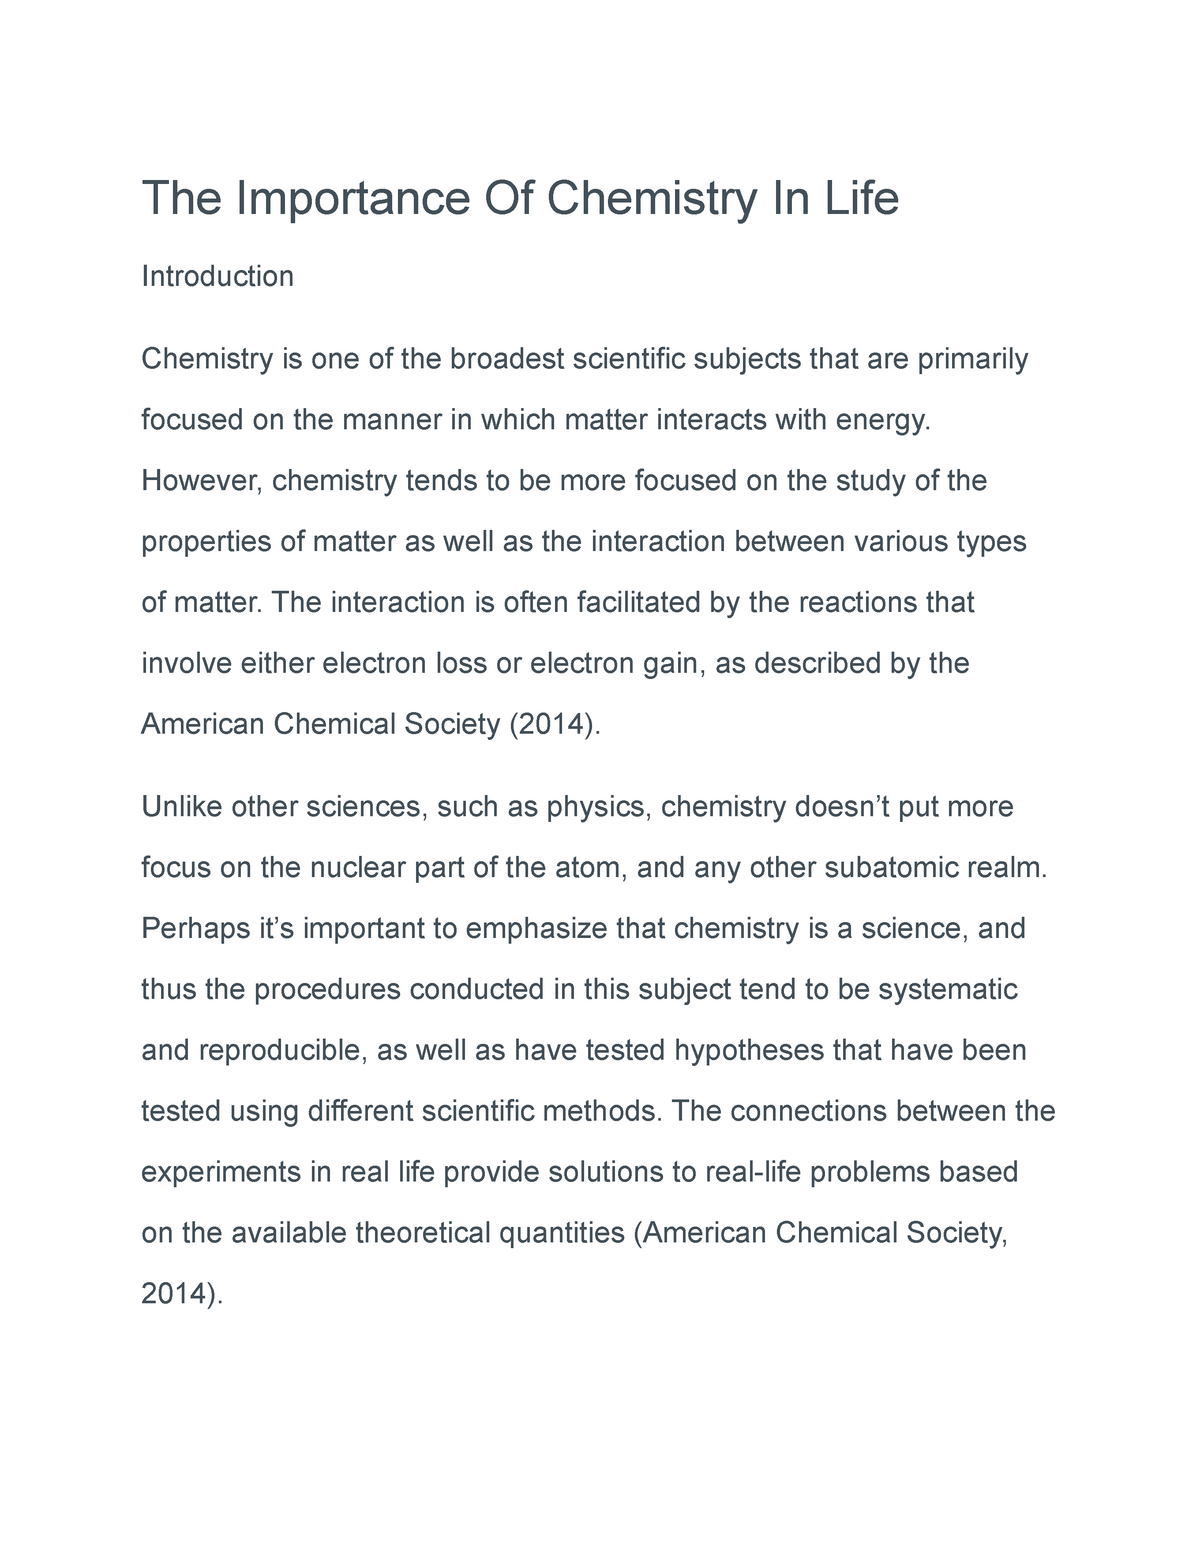 essay about chemistry 500 words